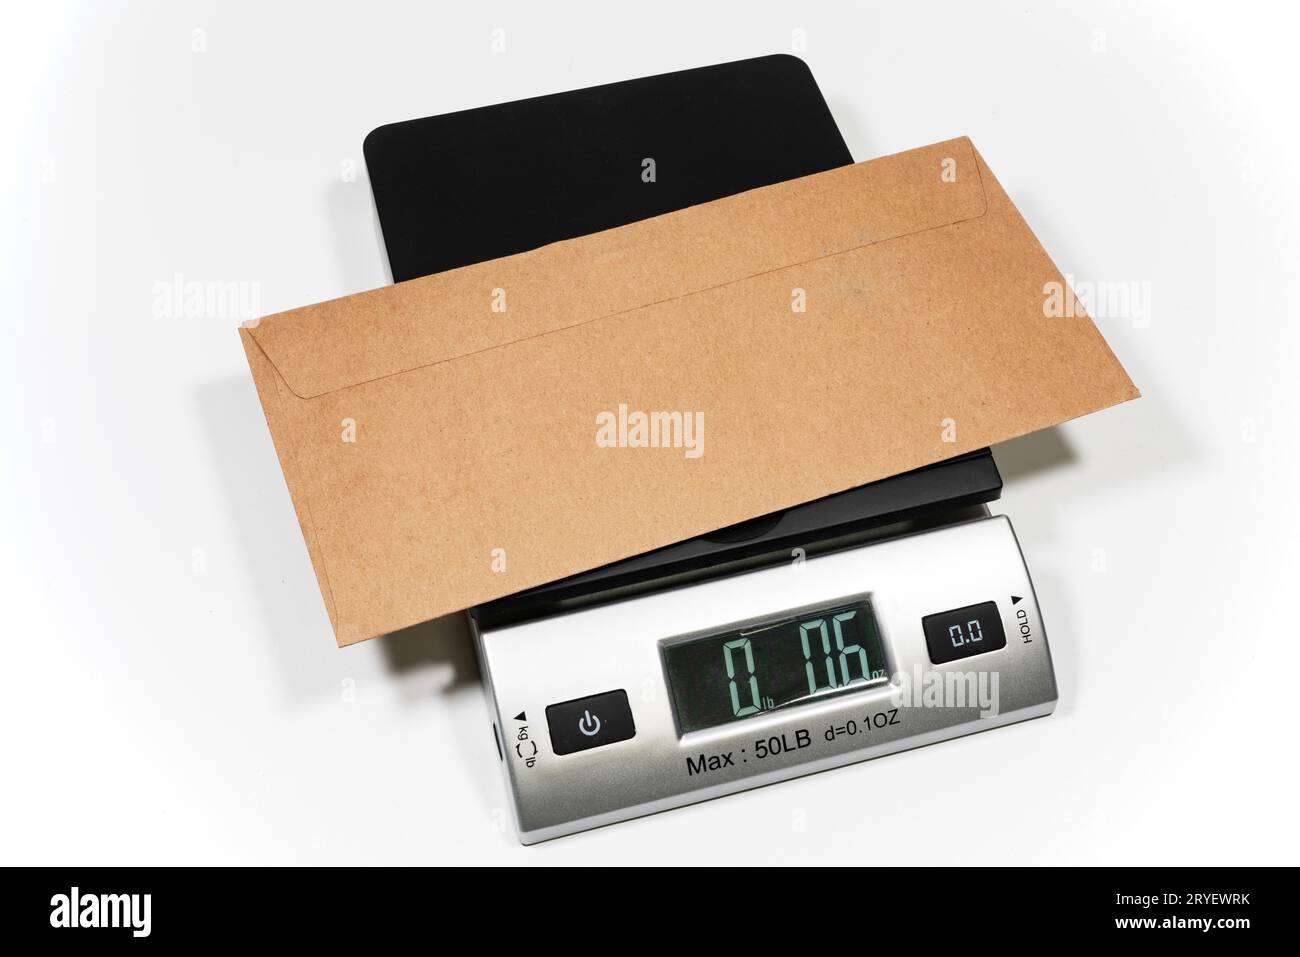 https://c8.alamy.com/comp/2RYEWRK/an-electronic-scale-for-weighing-parcel-or-letter-2RYEWRK.jpg